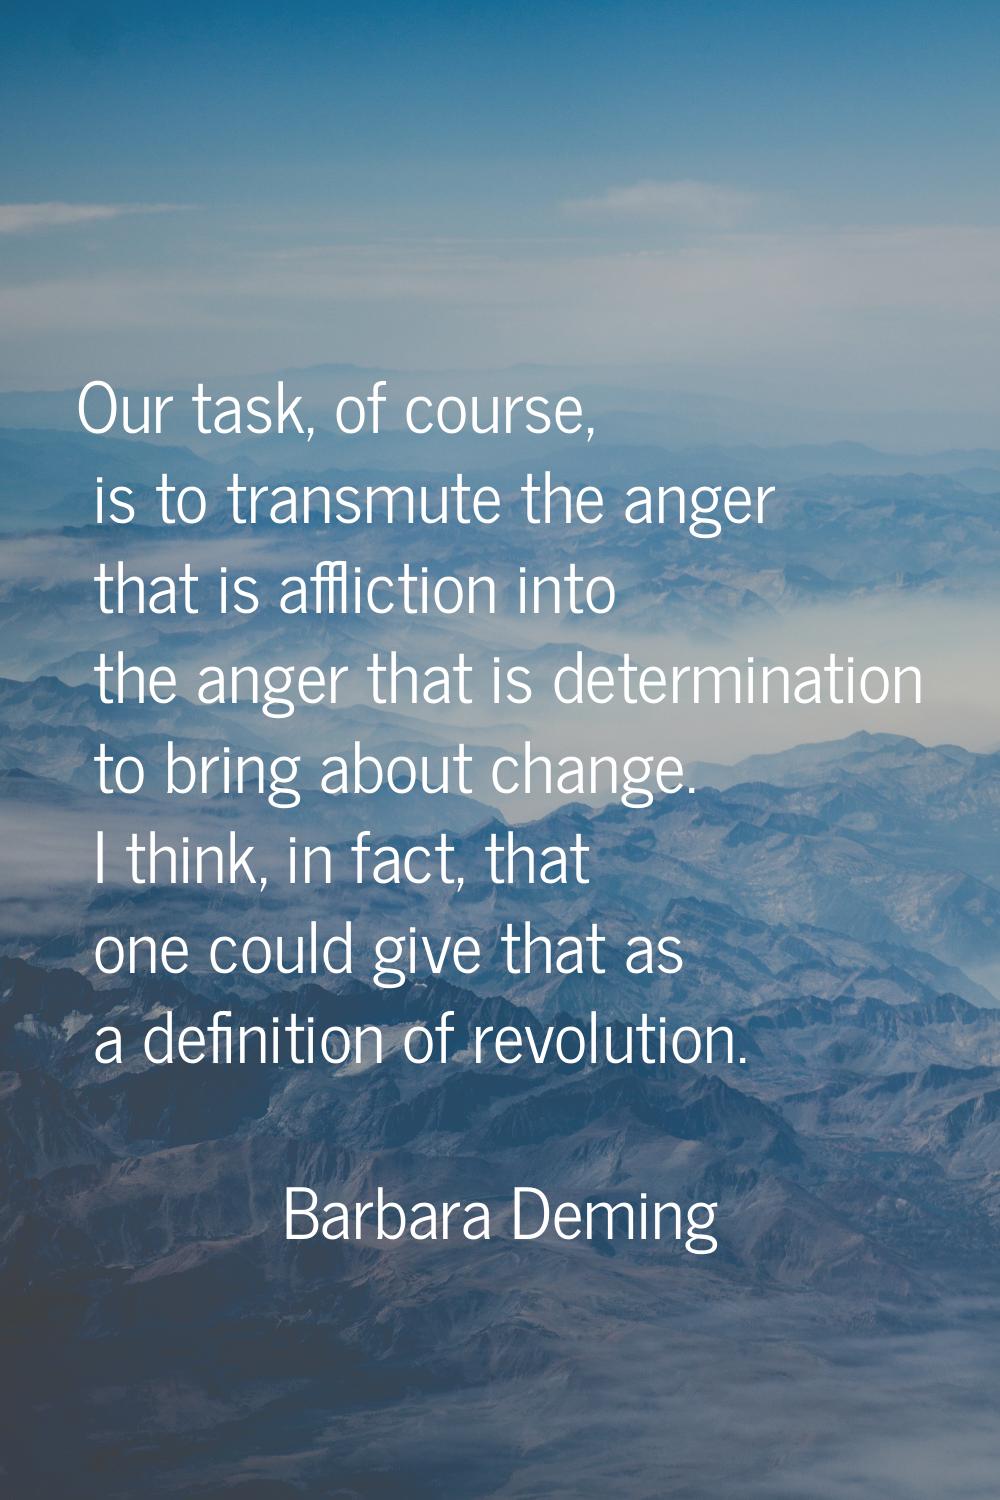 Our task, of course, is to transmute the anger that is affliction into the anger that is determinat